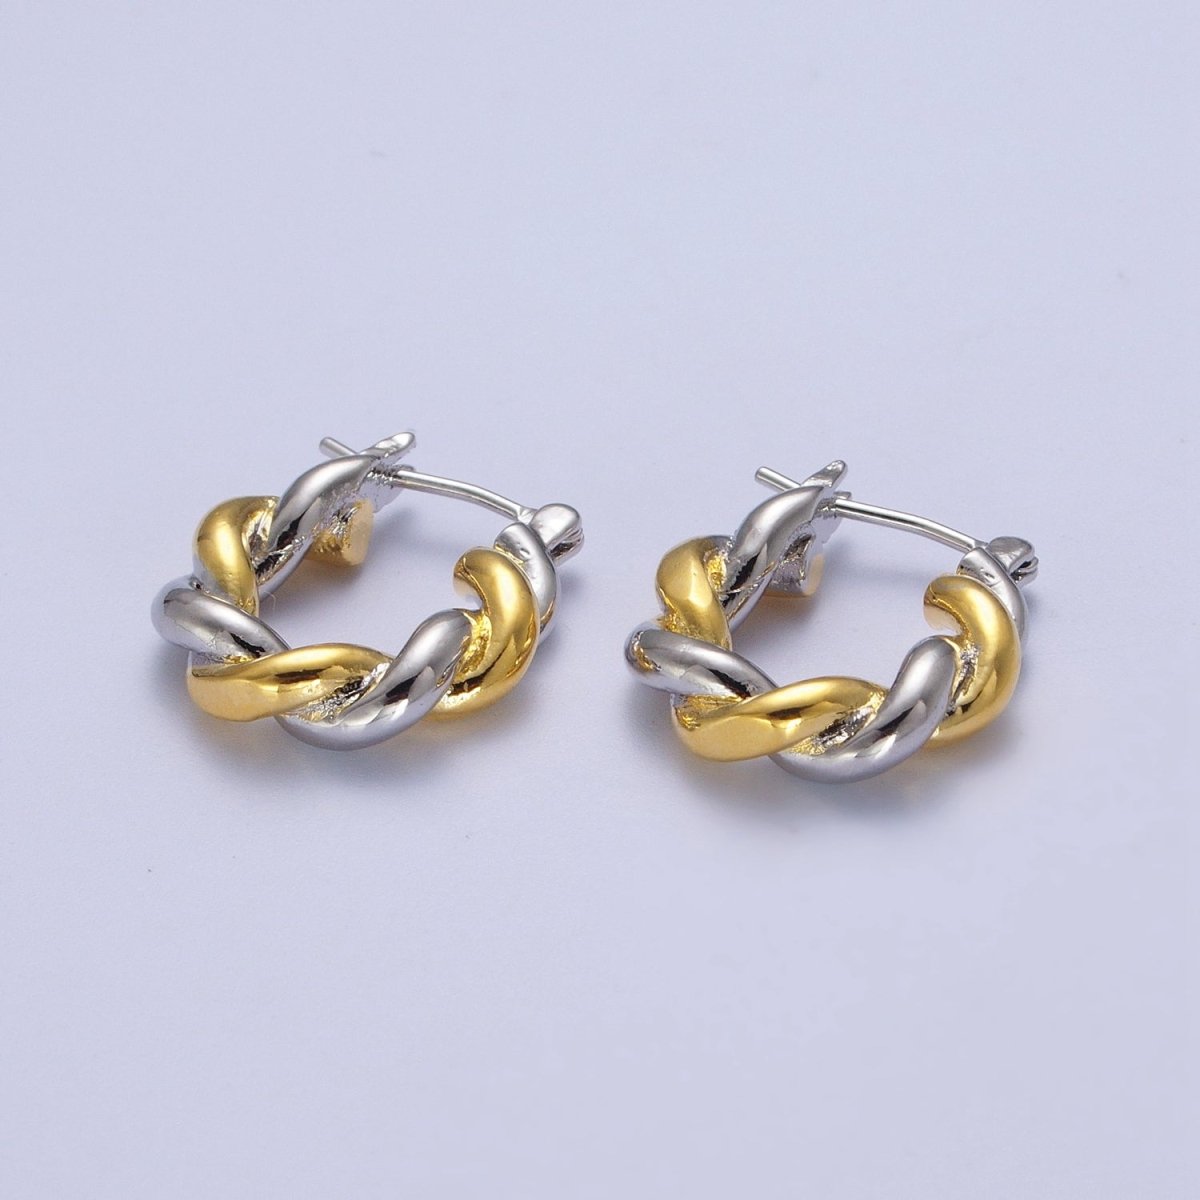 Mixed Metal Silver & Gold Twisted Chunky Two Tone Croissant Hoops Statement Earrings Gift For Her | AE-1084 AE-1085 AE-1086 - DLUXCA